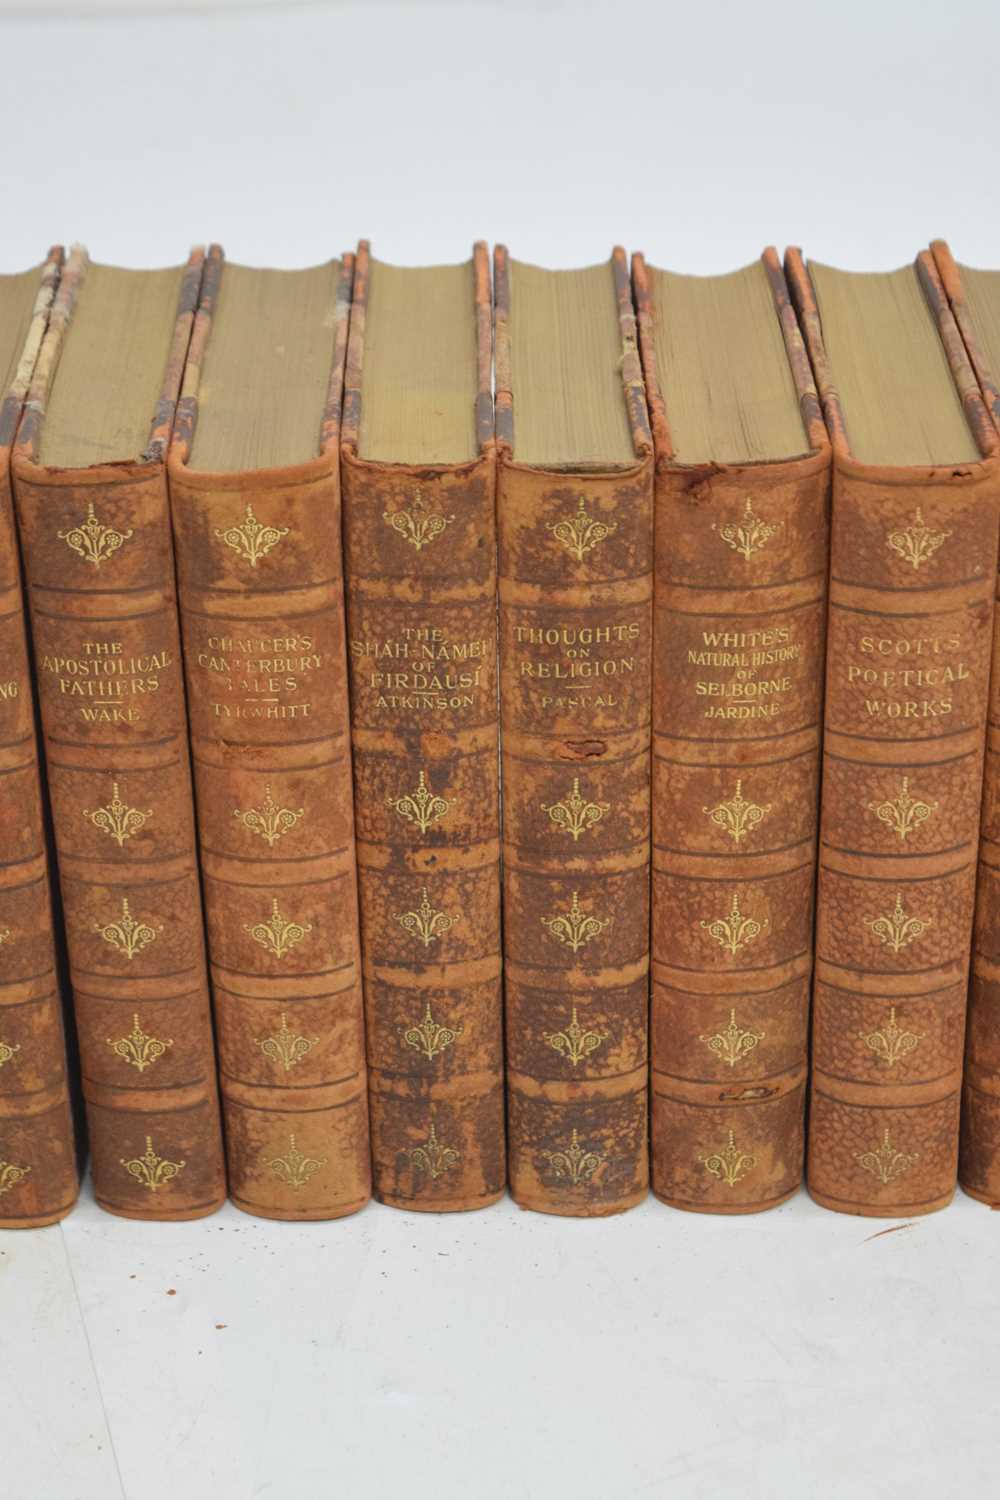 Twenty volumes from 'Sir John Lubbock's Hundred Books', leather bound, circa 1898 - Image 4 of 10